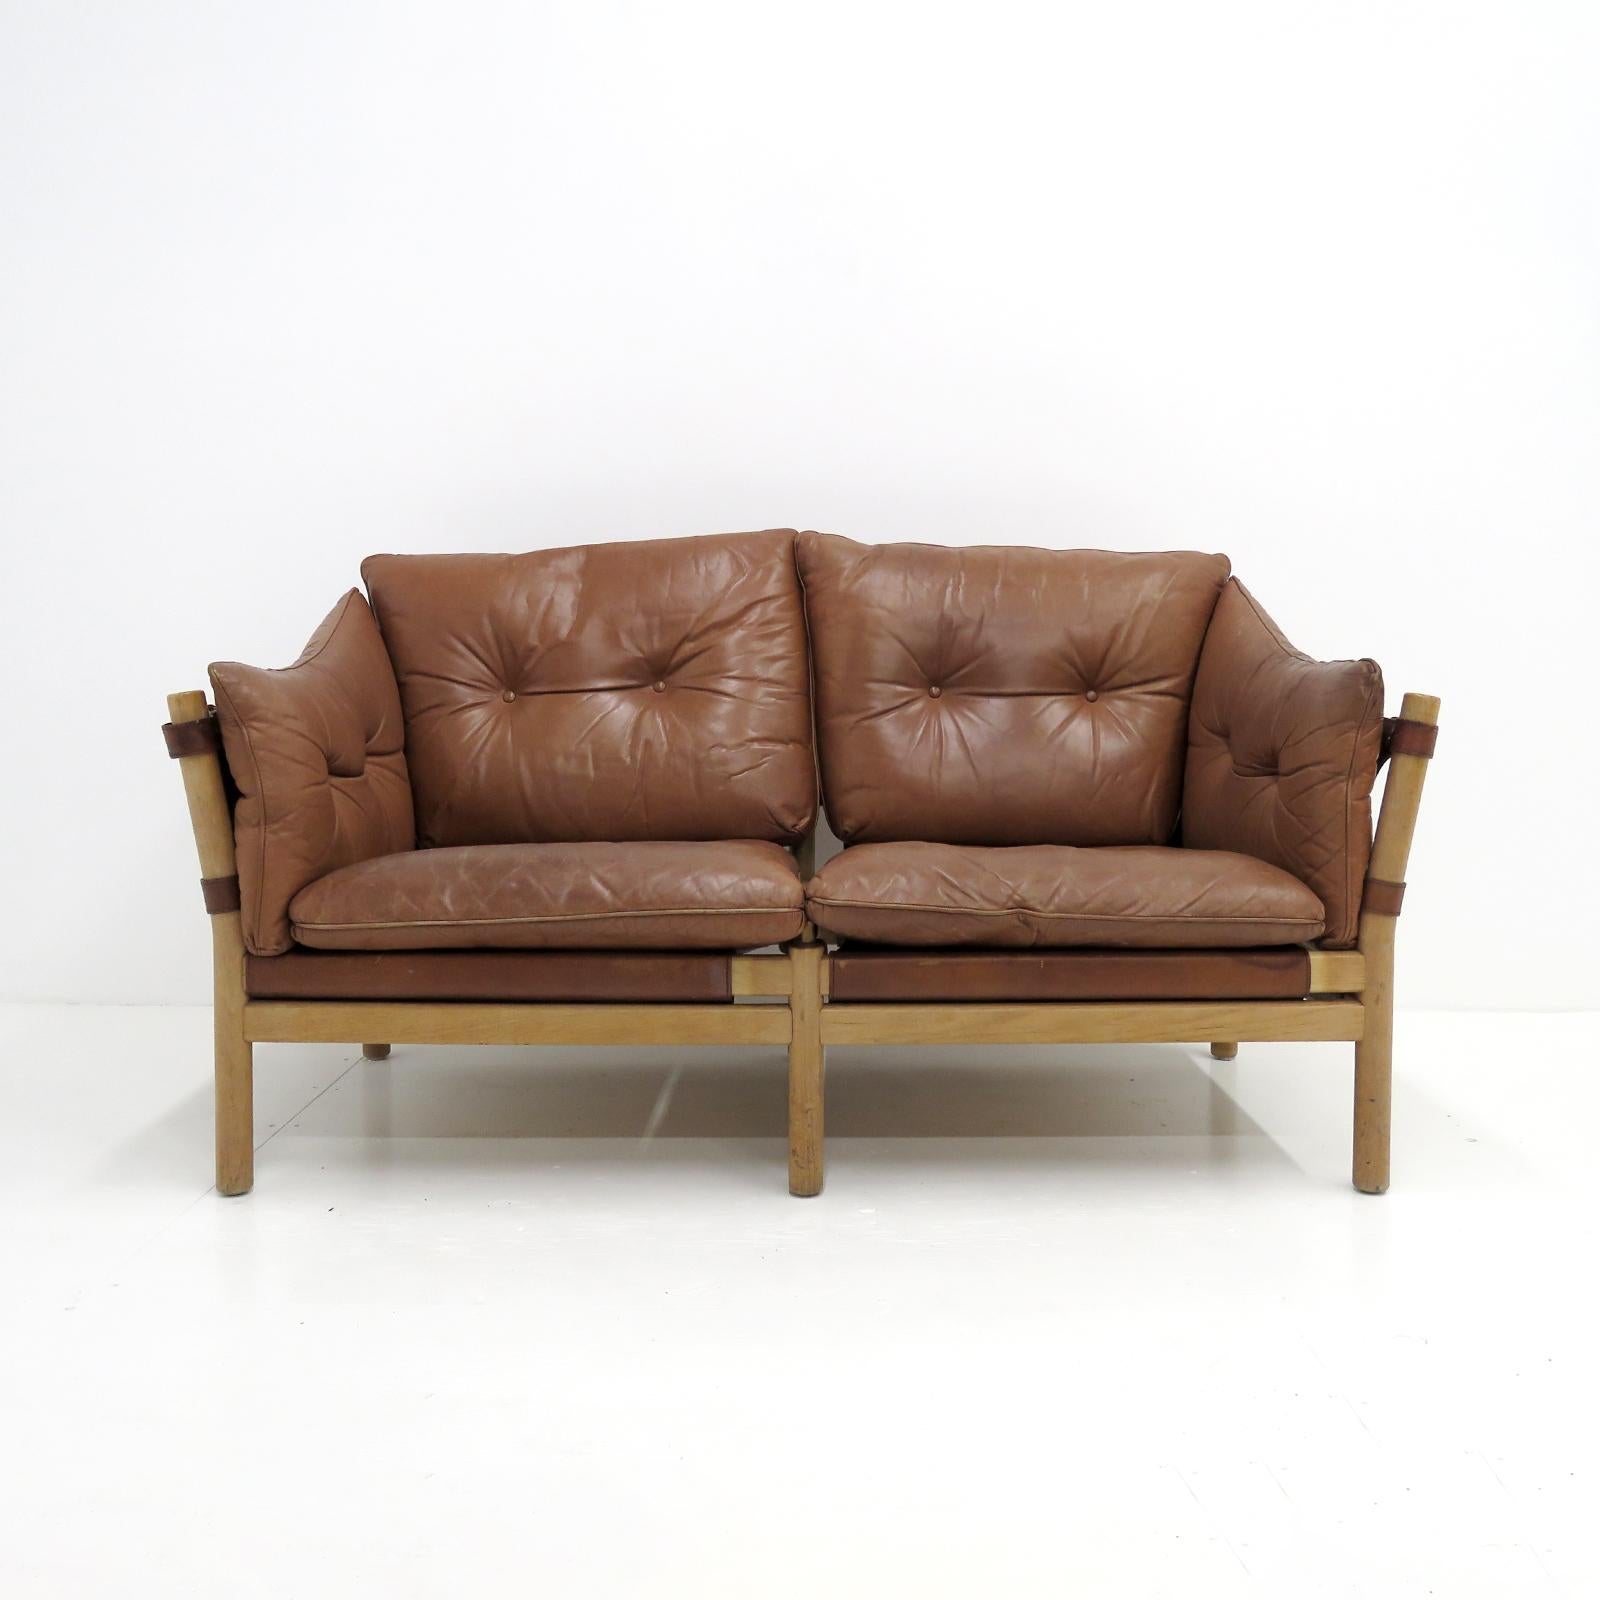 Stunning leather settee designed by Arne Norell in the early 1960s and produced by Aneby Møbler, Sweden, with thick, cognac colored leather cushions on saddle leather sling supports with brass hardware, the frame is made of sturdy, solid, beech,